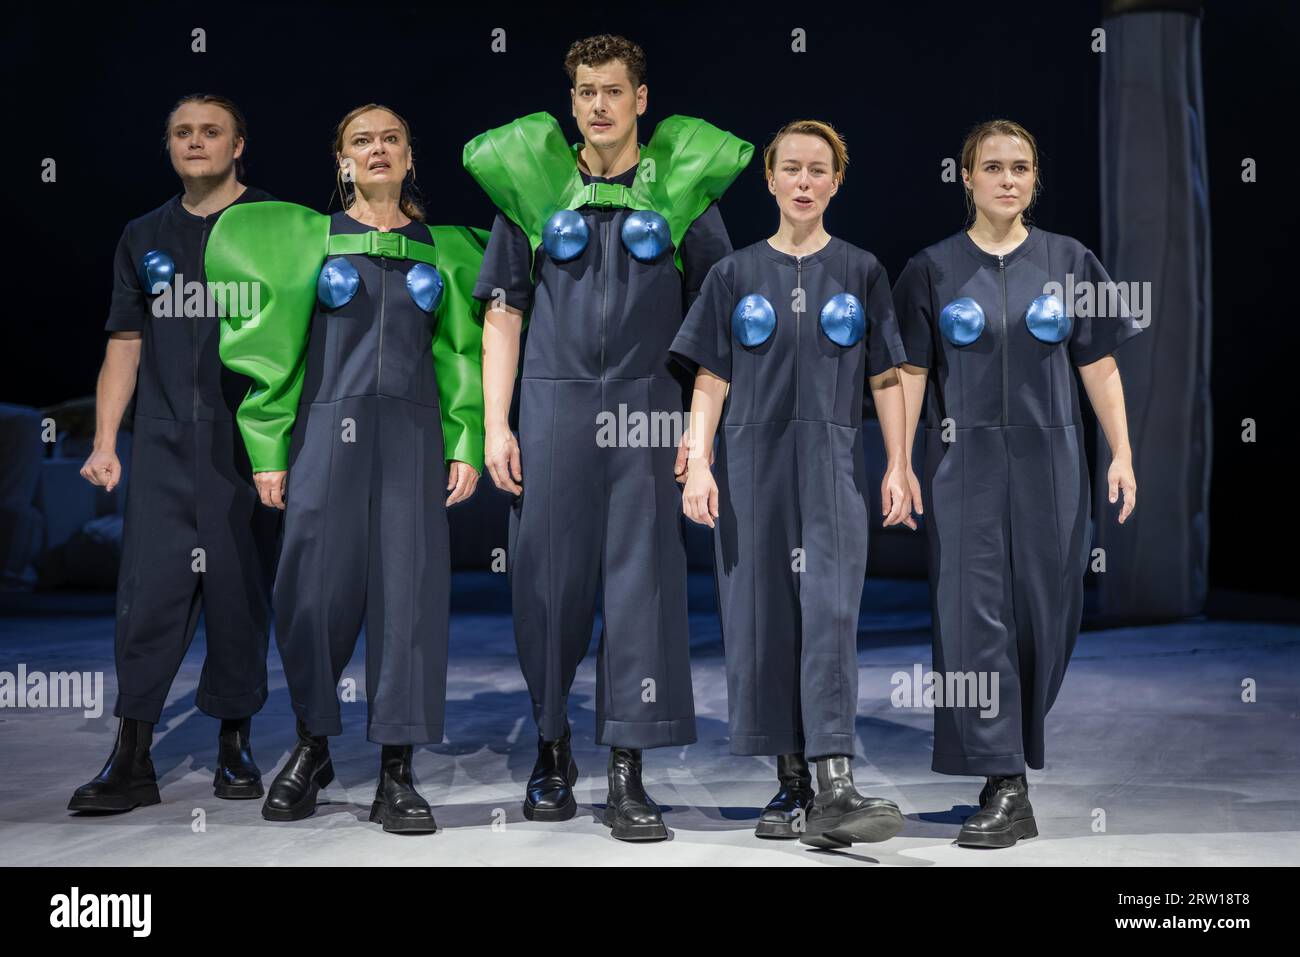 Cottbus, Germany. 13th Sep, 2023. Actors Johannes Scheidweiler (l-r), Sigrun Fischer, Markus Paul, Sophie Bock and Juli Niemann stand on stage as the band of robbers during a photo rehearsal for the play 'Die Räuber'. The production based on the first German drama by Friedrich Schiller, in a version by director Pia Richter, is the first premiere of the Staatstheater Cottbus in the 23.24 season on Sept. 16, 2023. Credit: Frank Hammerschmidt/dpa/Alamy Live News Stock Photo